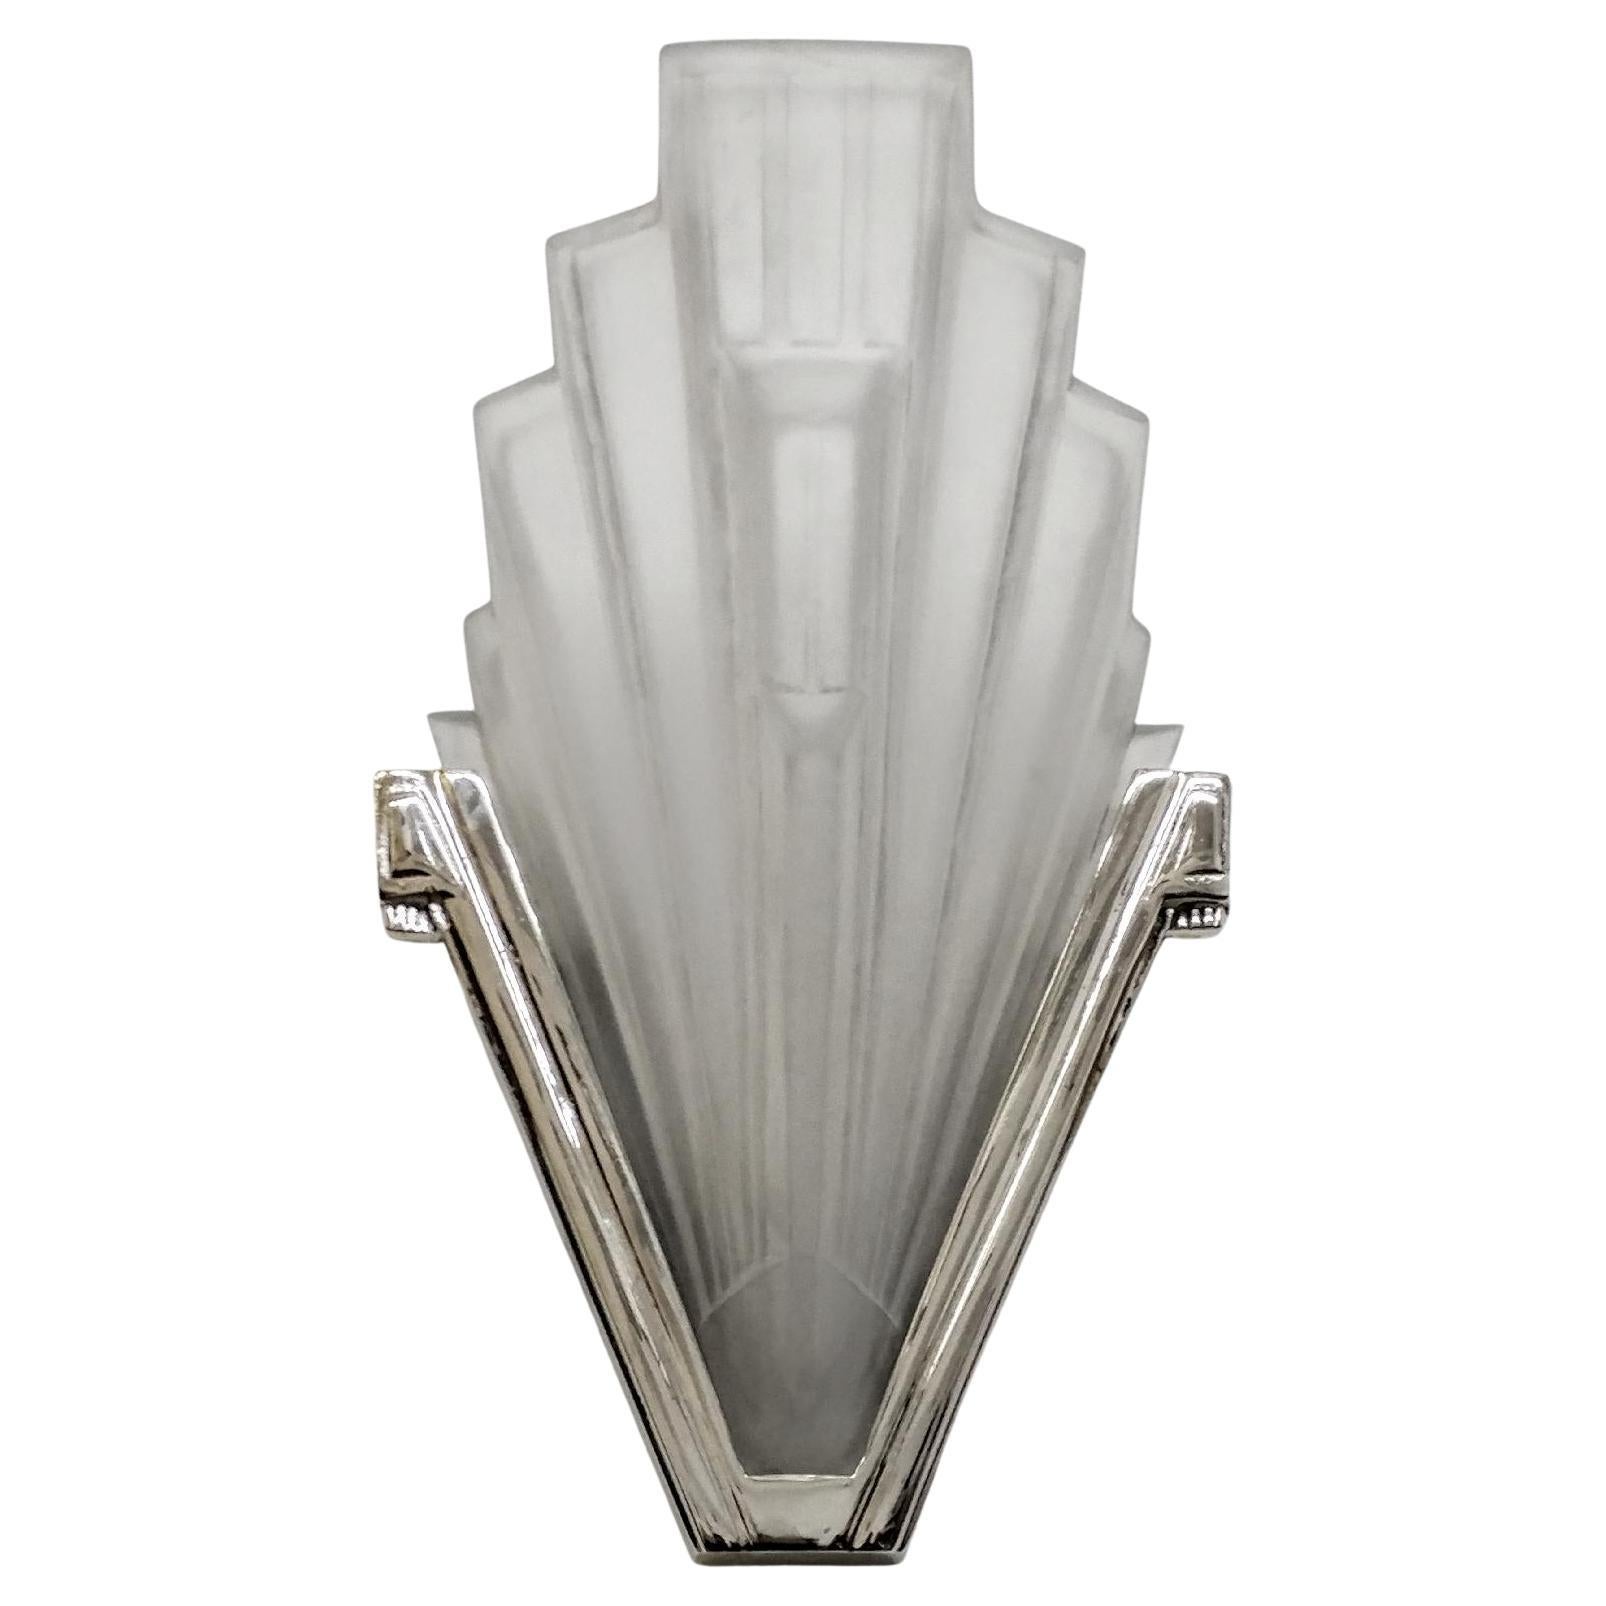 A stunning pair of French Art Deco sconces by the French artist “Sabino“ in great condition. Clear frosted molded glass shades with Skyscraper geometric motif. Held by polished nickeled bronze frames. Replated in nickel and rewired to U.S. standards